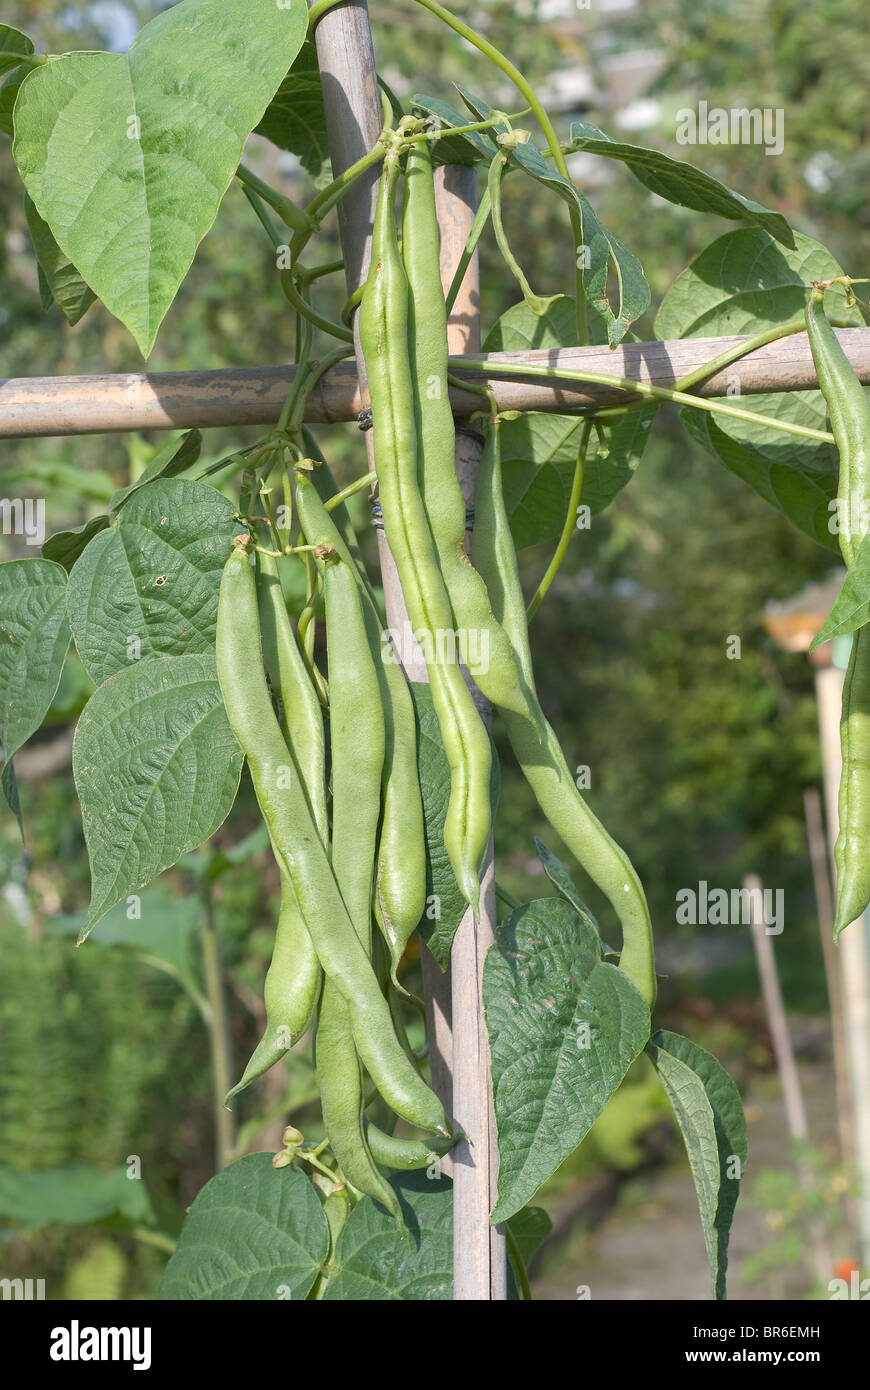 Vegetable Garden with Fresh and Nutritious Green Beans Stock Photo